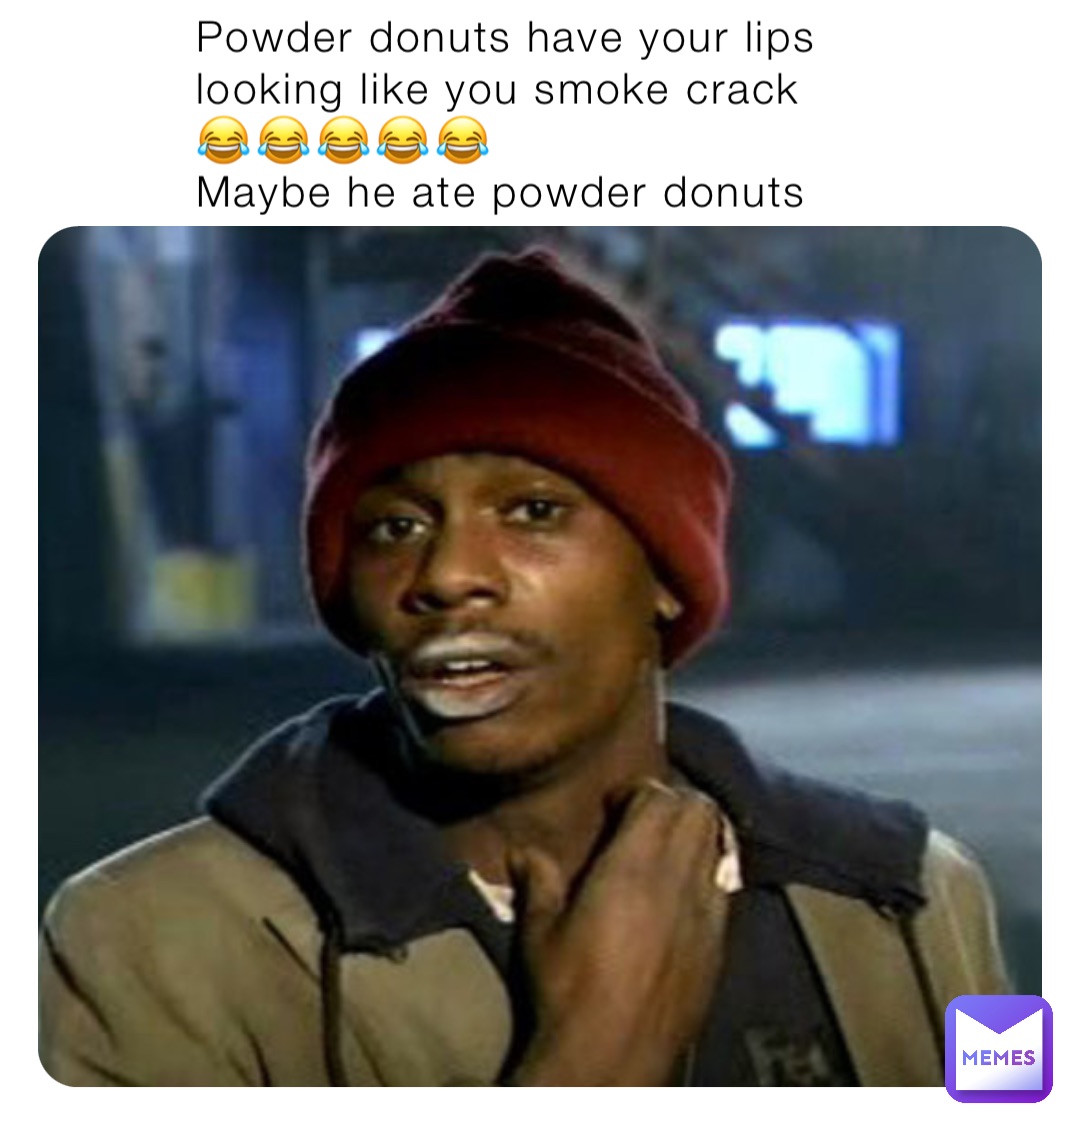 Powder donuts have your lips looking like you smoke crack 😂😂😂😂😂
Maybe he ate powder donuts